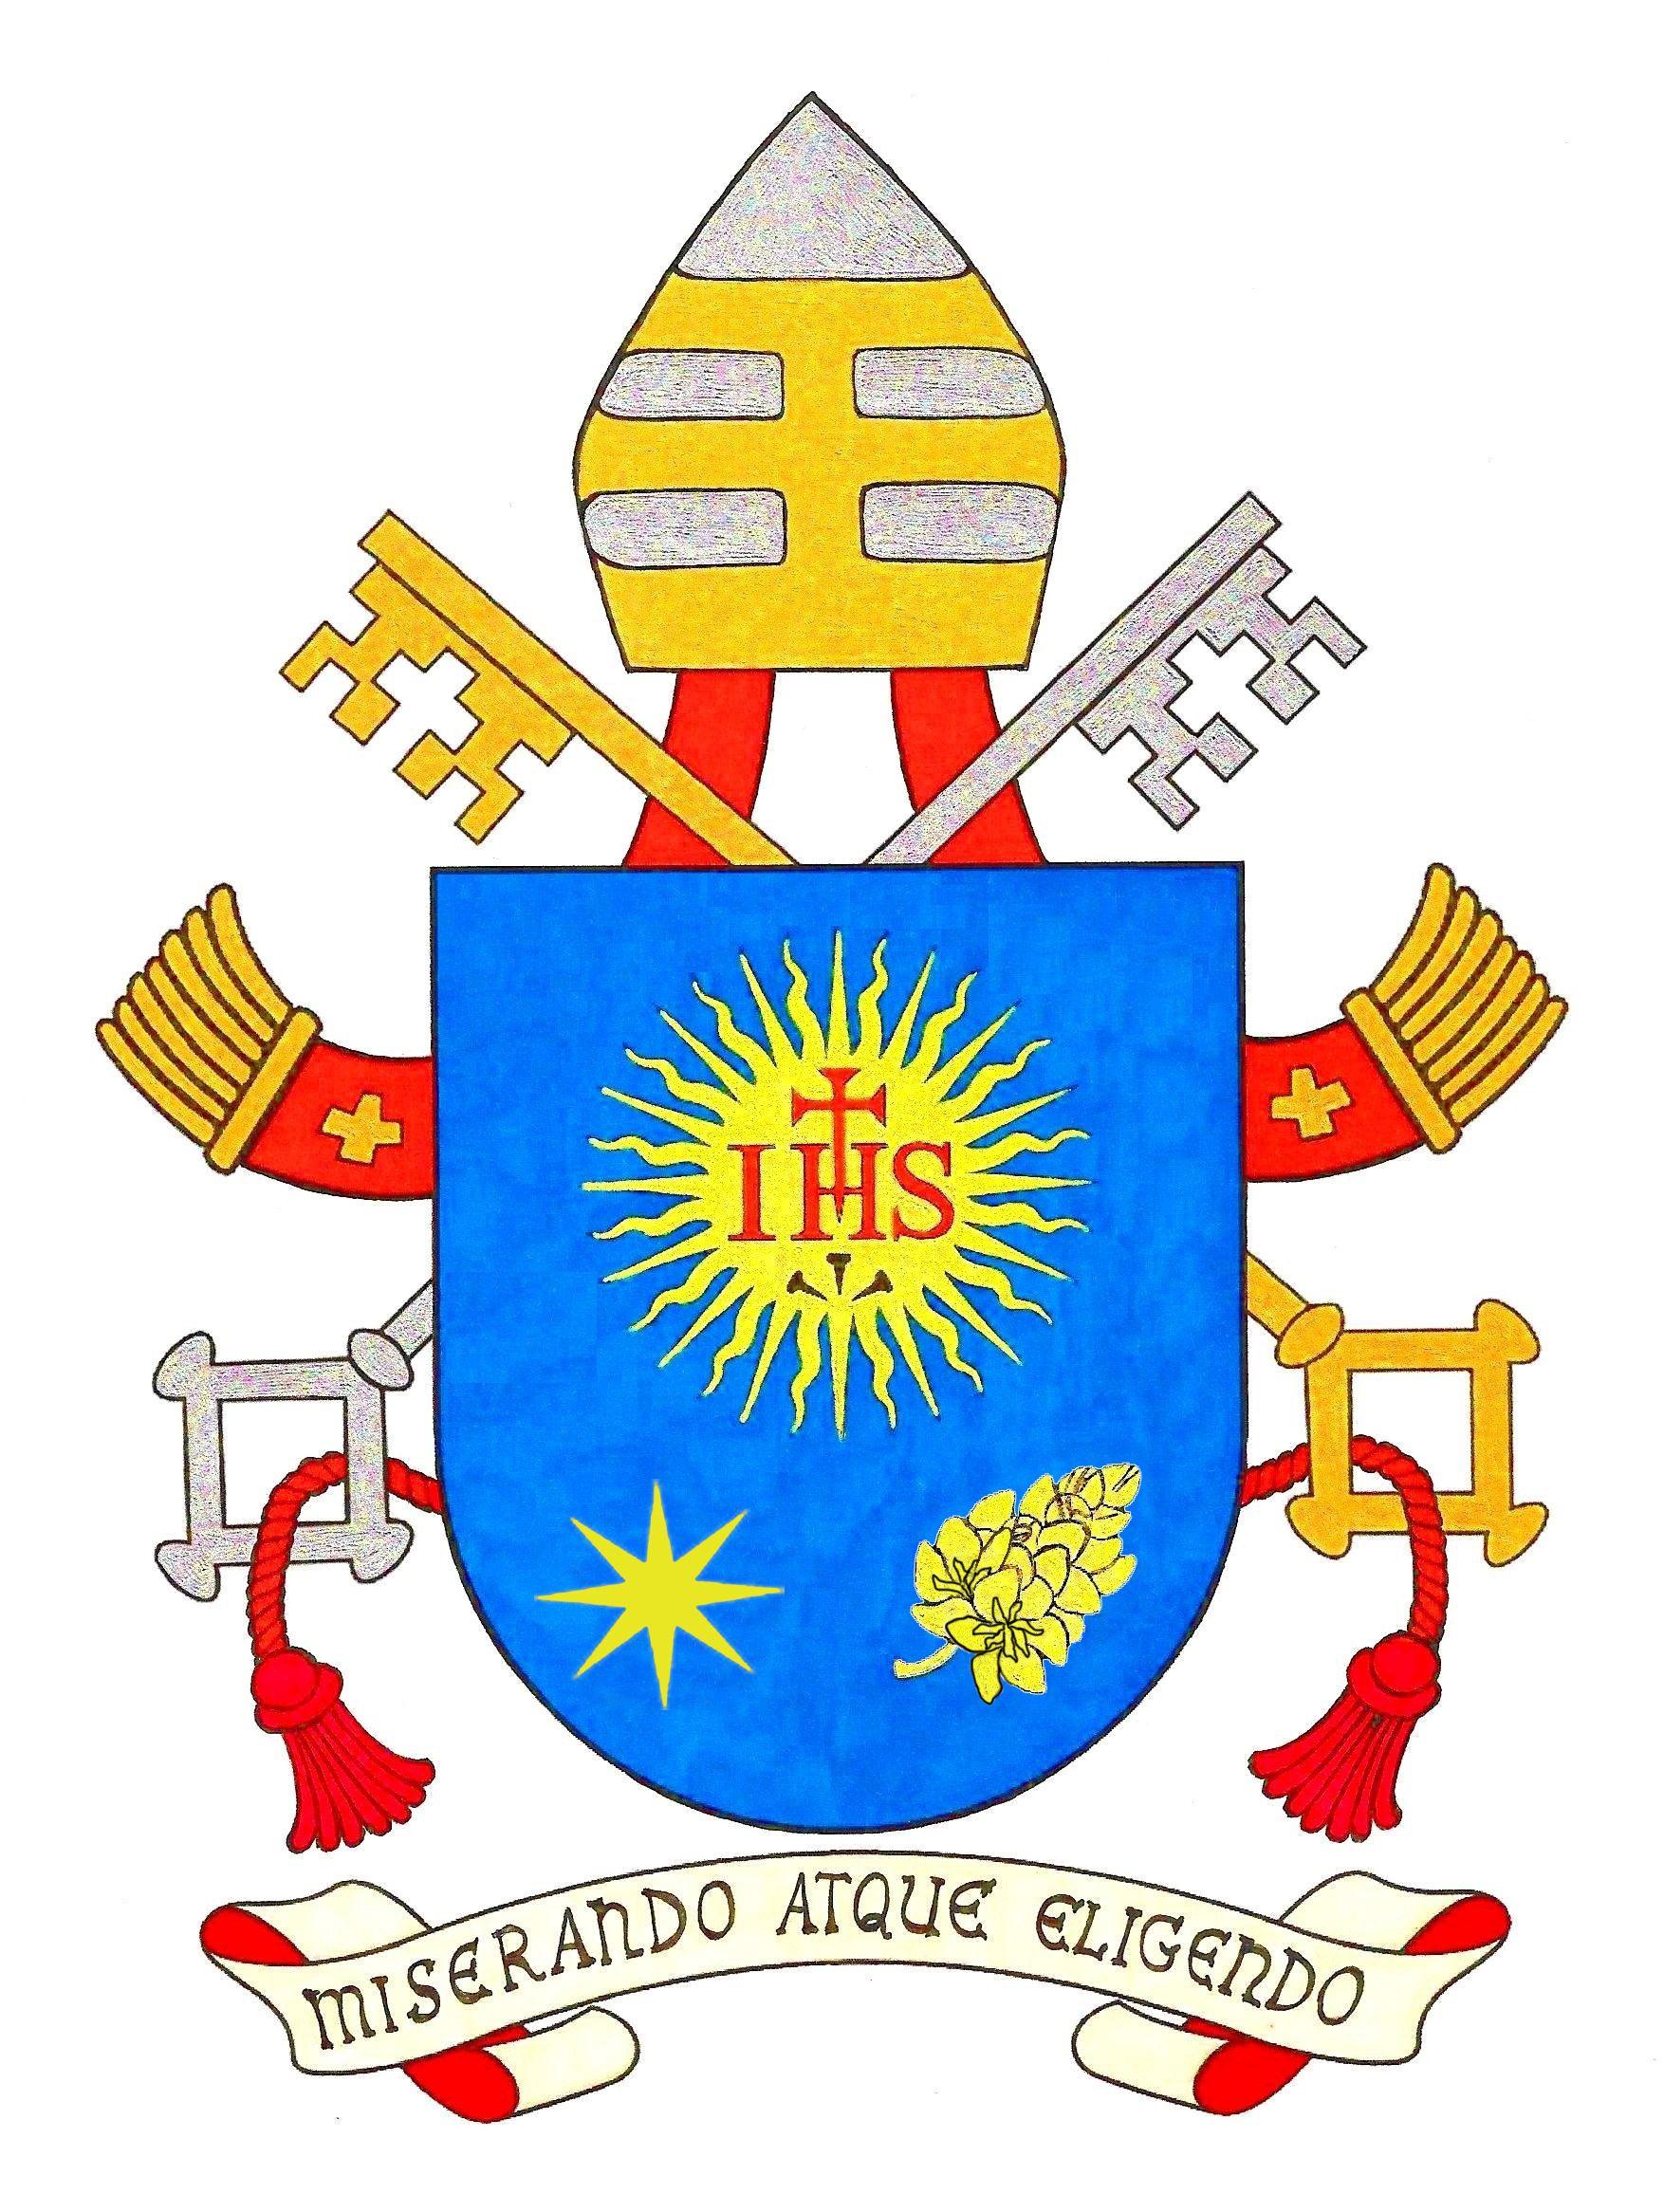 Vatican Logo - Pontifical Insigna Flag, Coat of Arms and Seal of the Holy See and